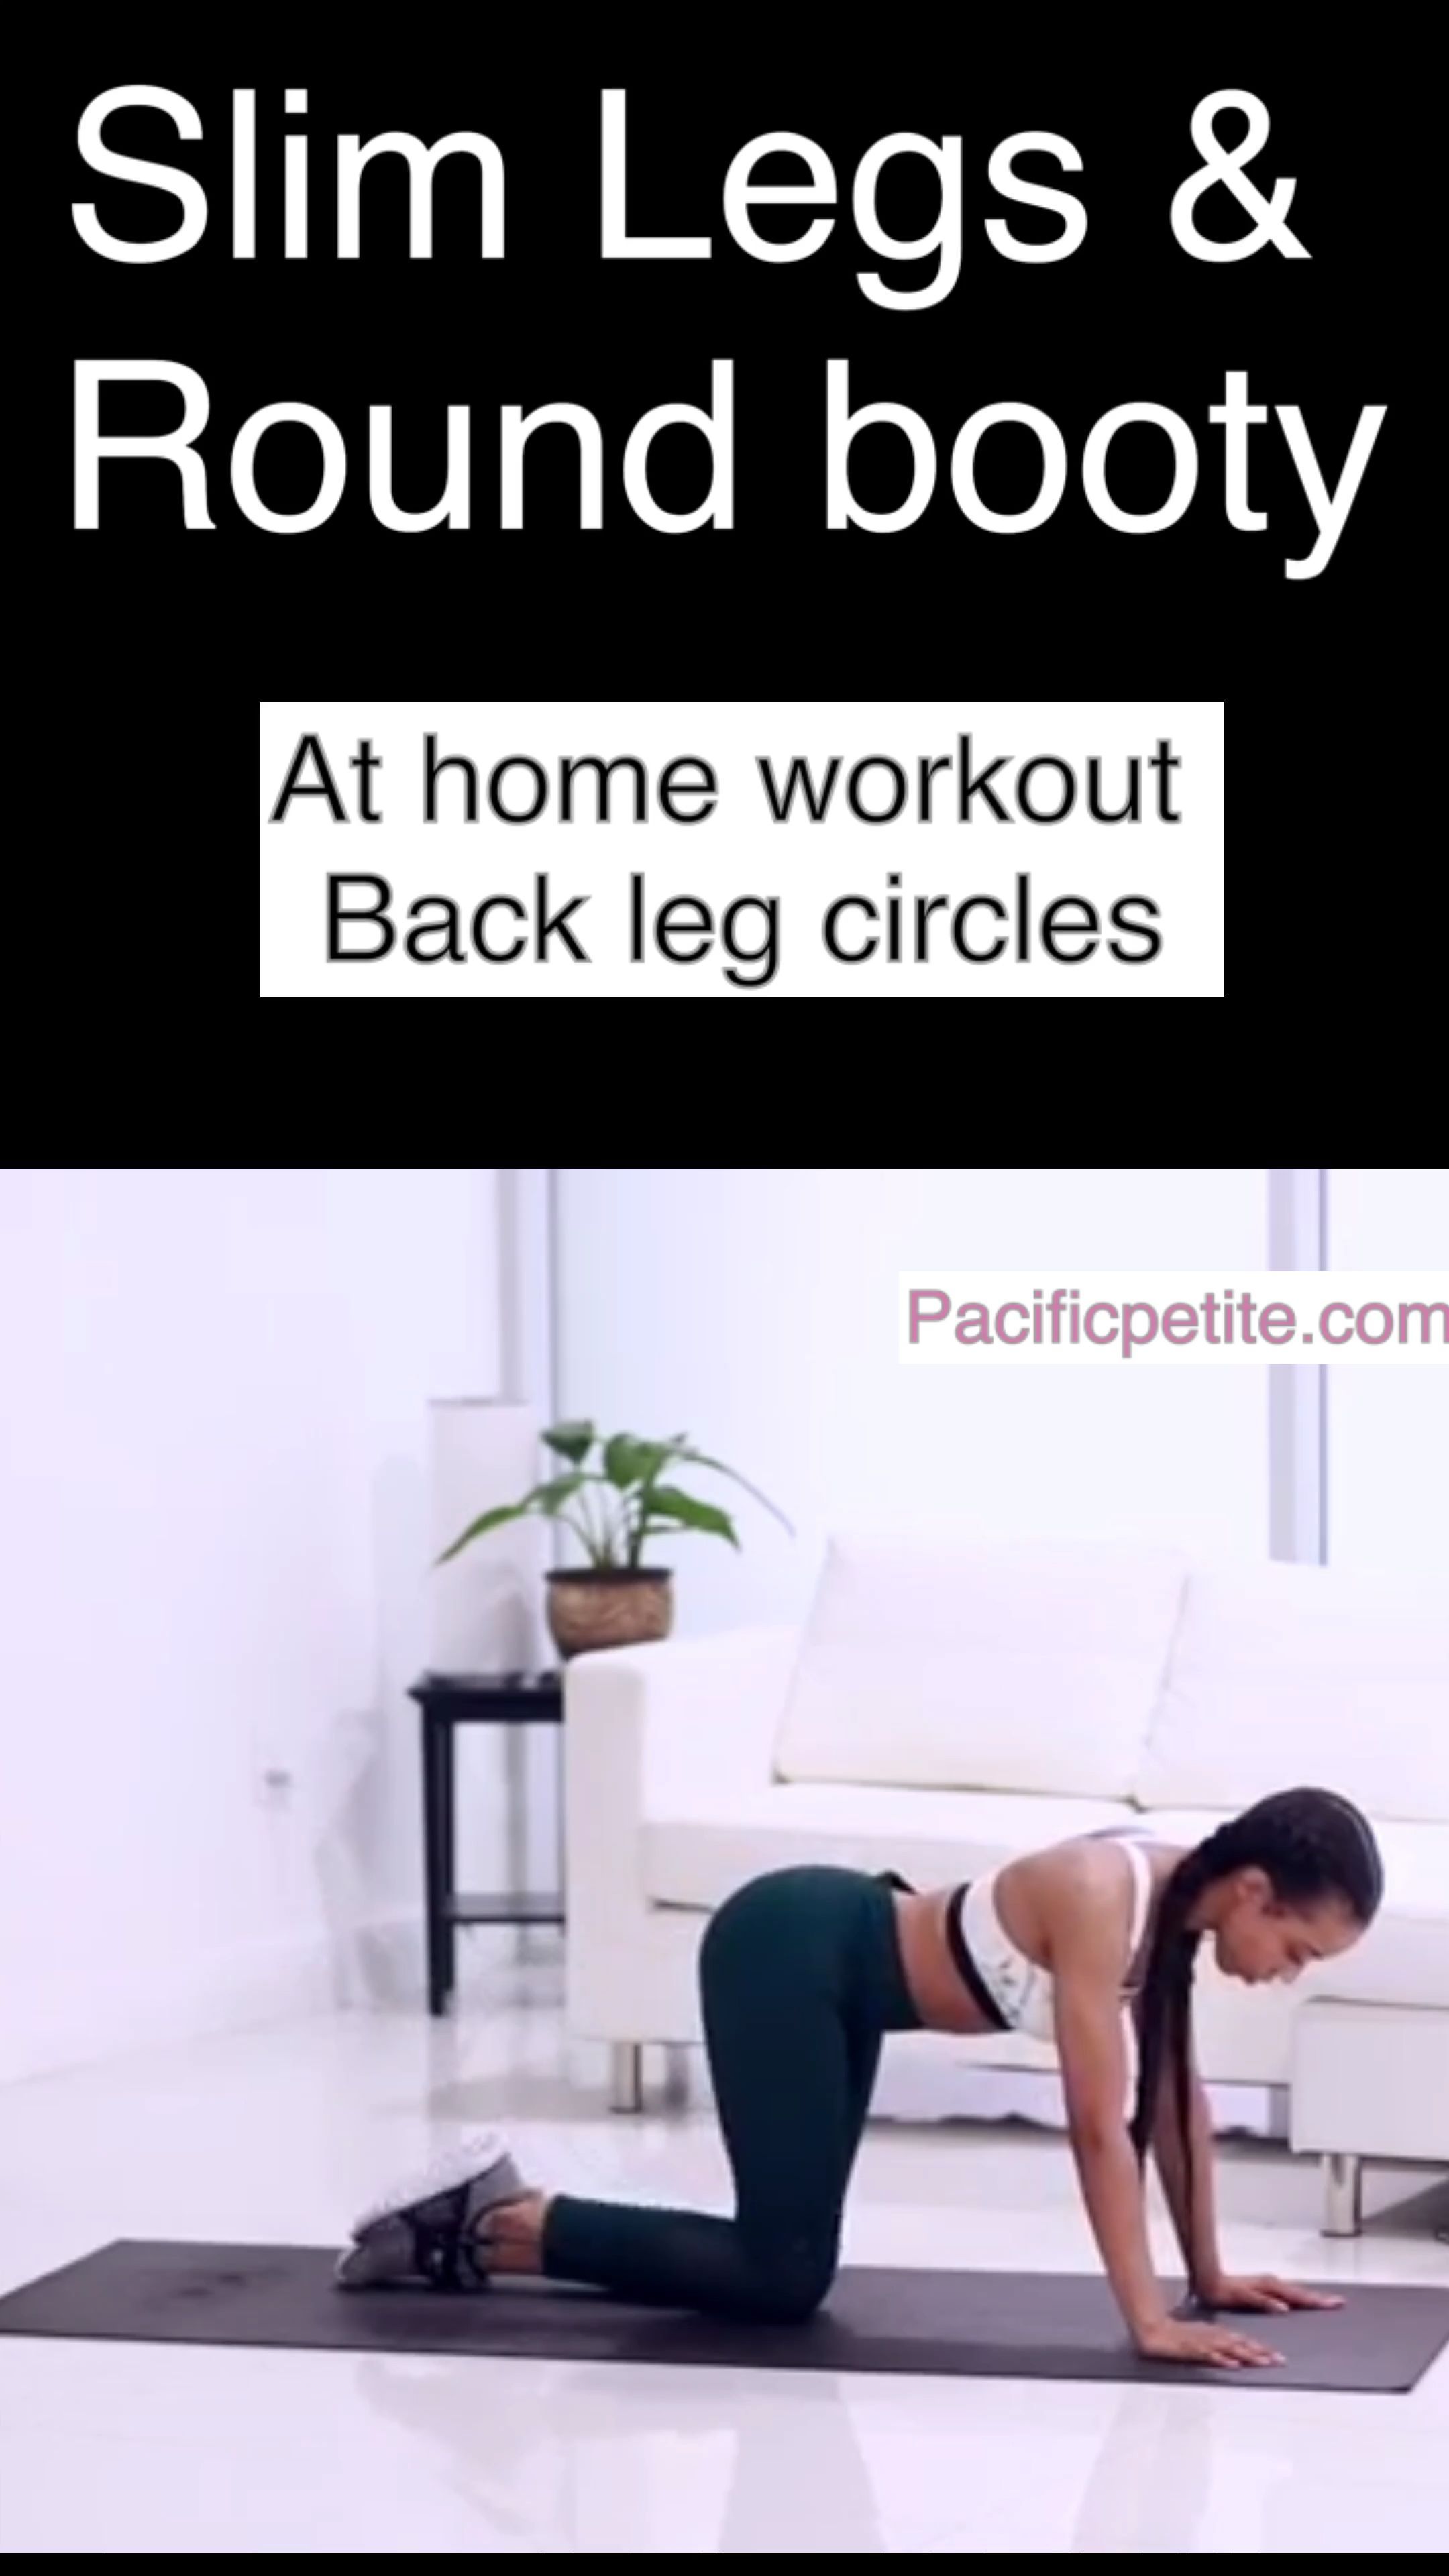 At home slim legs workout plan for long, toned slim legs for women fast. No gym, no equipment. -   23 fitness At Home videos ideas